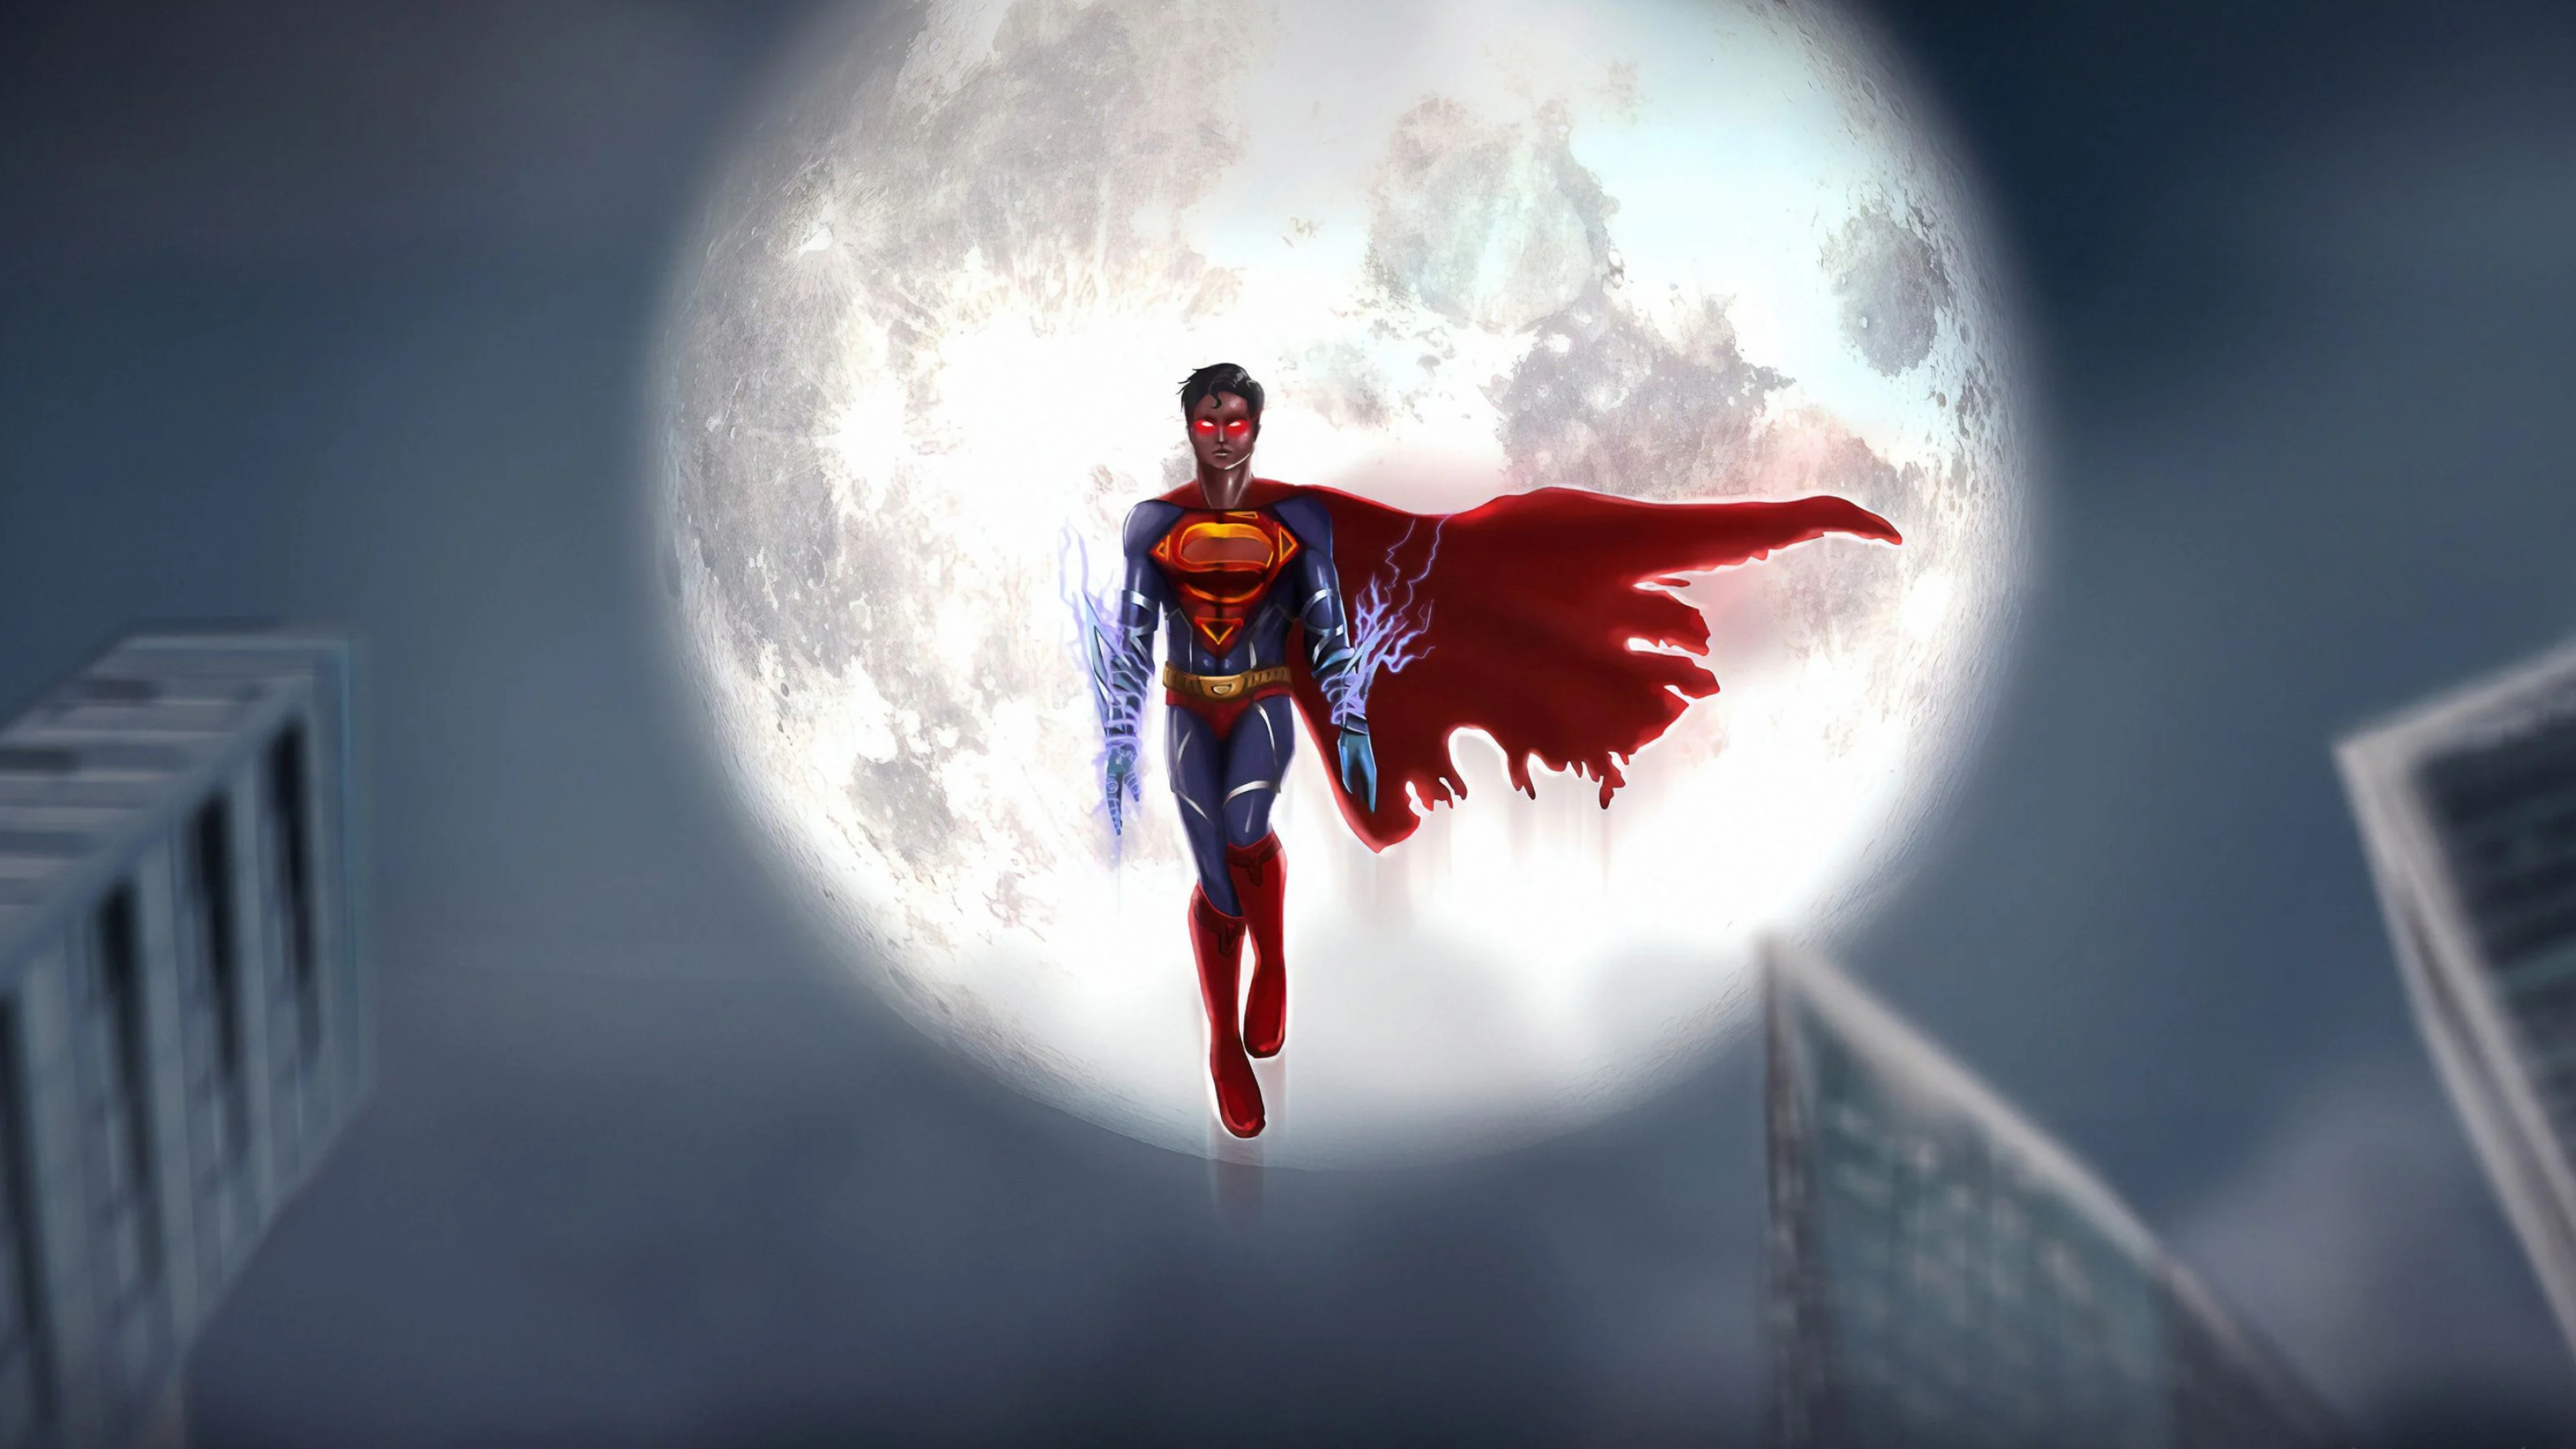 3840x2160 Superman Flying Computer Wallpapers Top Free Superman Flying Computer Backgrounds